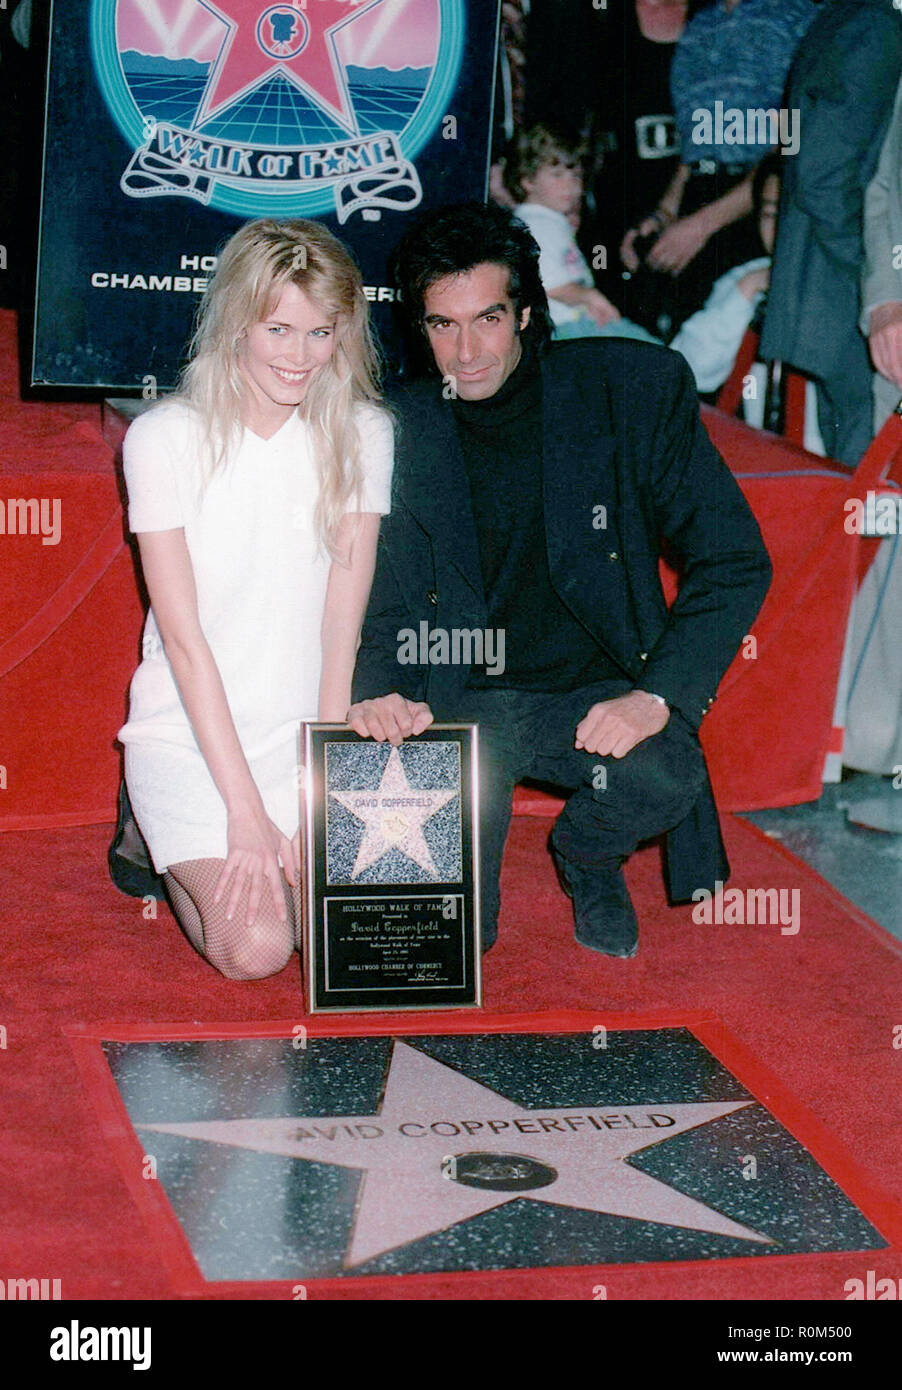 David Copperfield, Claudia Schiffer - star ÉÉ.. Event in Hollywood Life - California, USA, Film Industry, Celebrities, Photography, Bestof, Arts Culture and Entertainment, Topix Celebrities fashion, Best of, Hollywood Life,  Red Carpet and backstage, movie celebrities, TV celebrities, Music celebrities, Topix, Bestof, Arts Culture and Entertainment, vertical, one person, Photography,   #Celebrity #Hollywood #RedCarpet #Actor #Actress #famousCelebrity #HollywoodEvent #TsuniUSA #CelebrityPhotography, Fashion inquiry tsuni@Gamma-USA.com , Credit Tsuni / USA,   Fashion, From the Year 1993 to 1999, Stock Photo